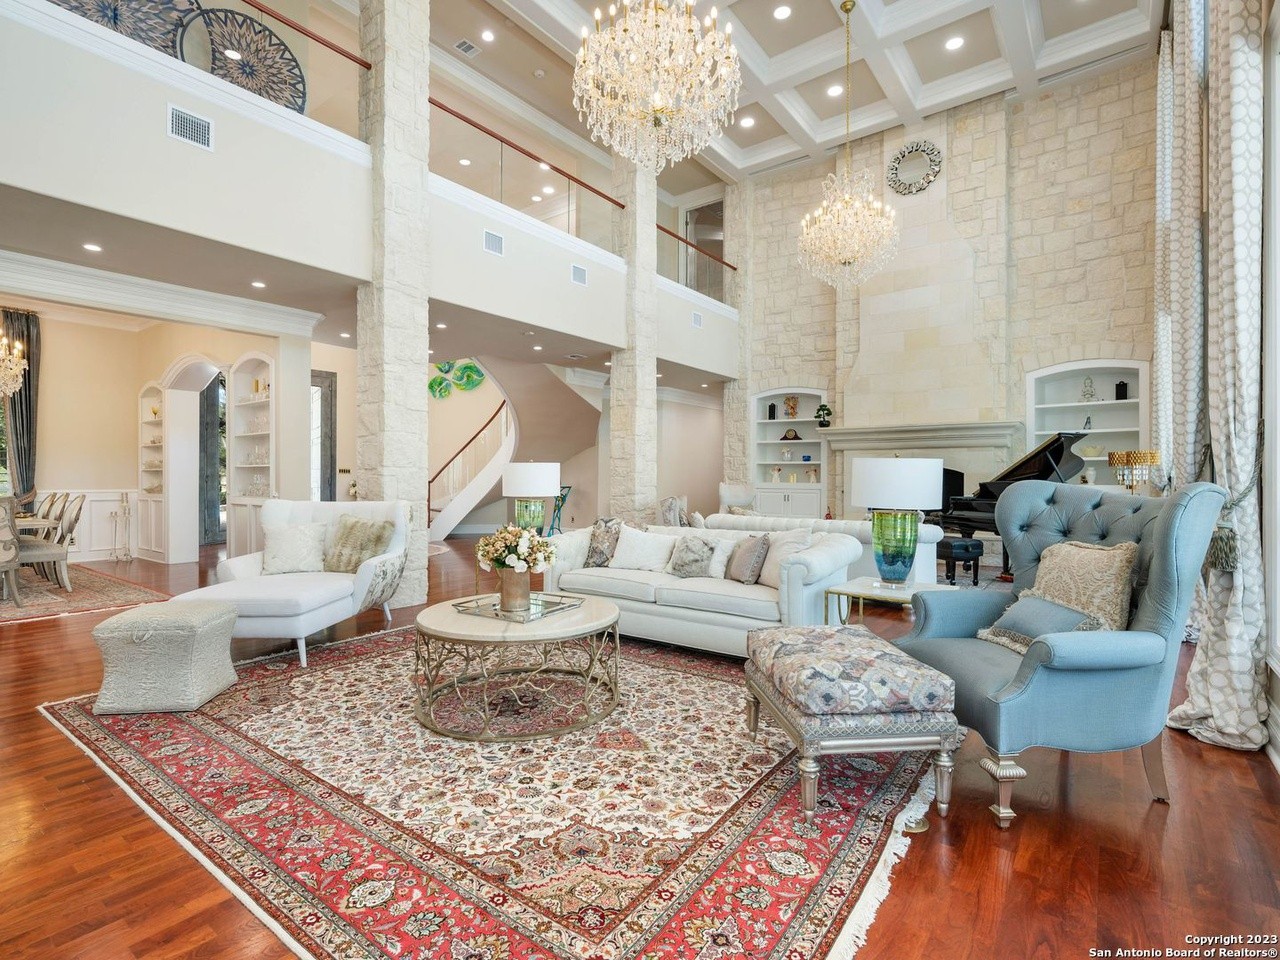 Spurs Coach Gregg Popovich's former San Antonio home is back on the market for $5.5 million